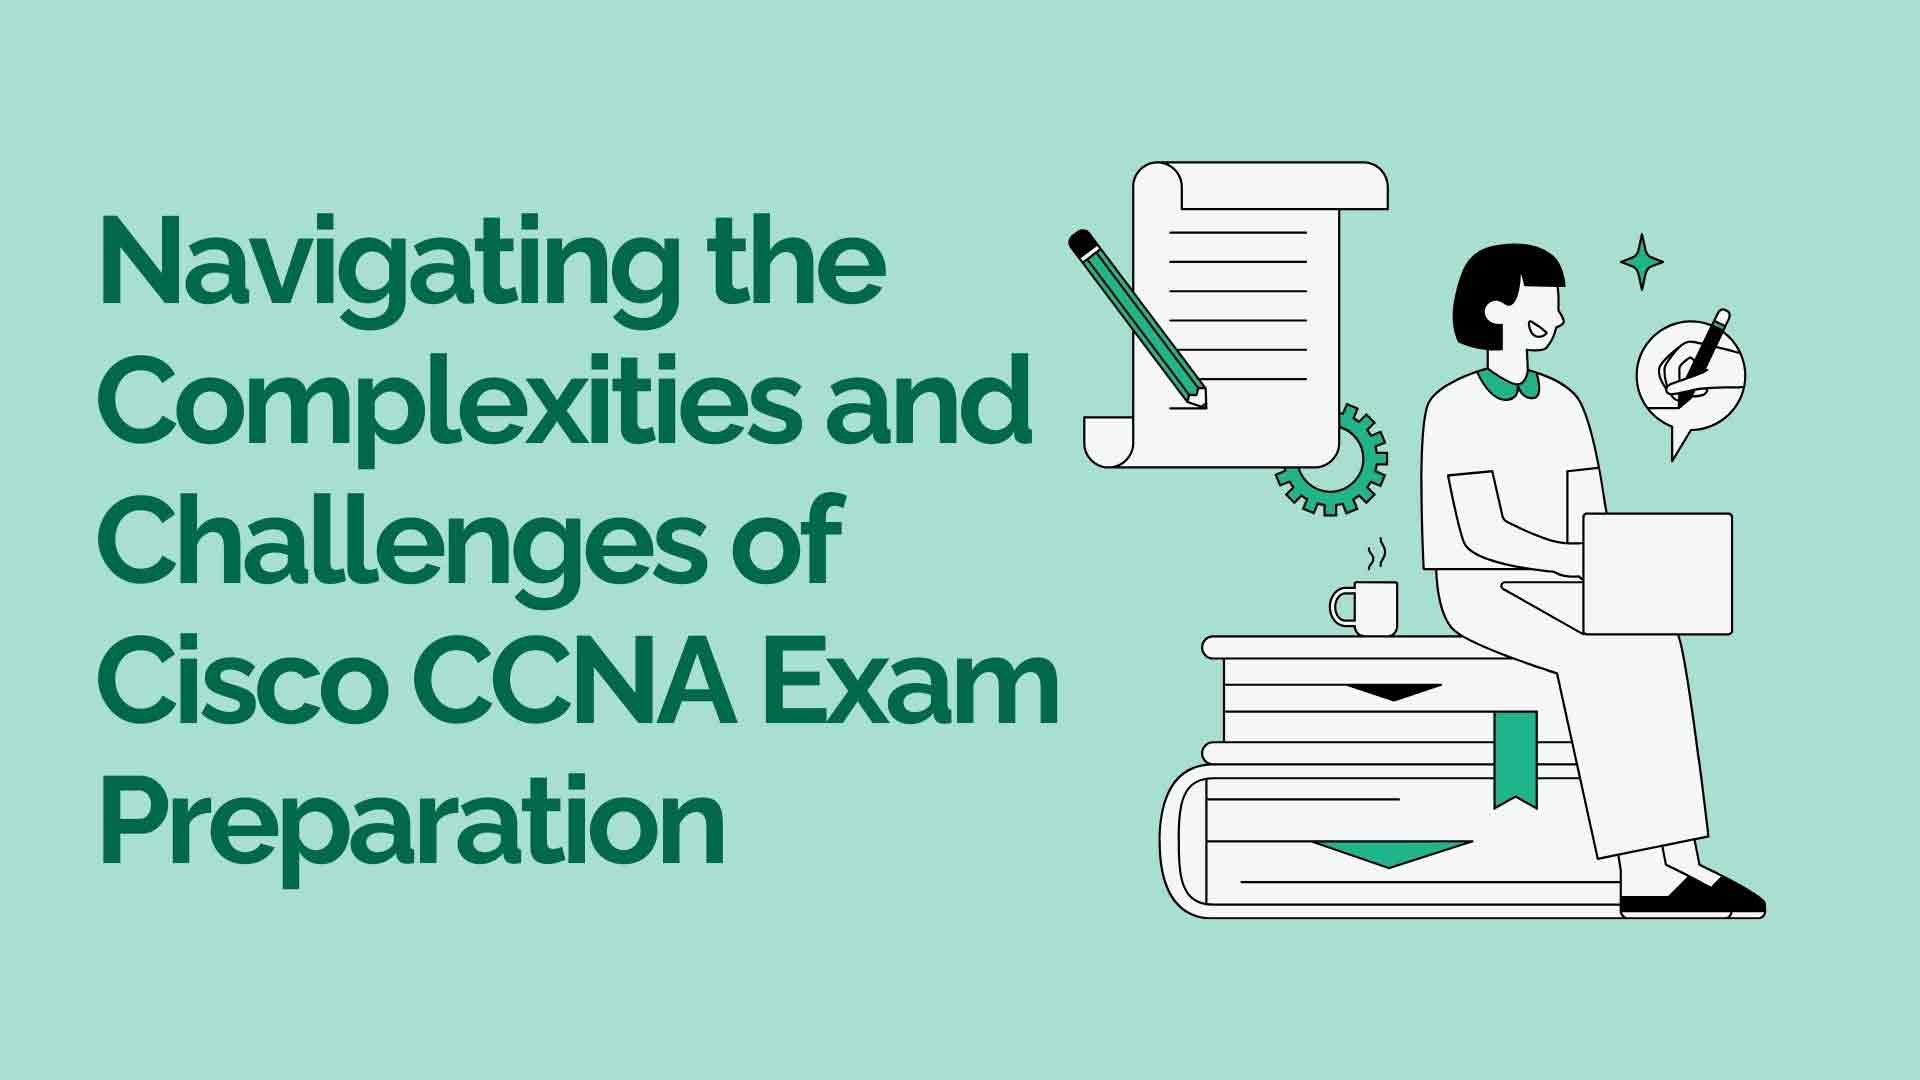 Navigating the Complexities and Challenges of Cisco CCNA Exam Preparation